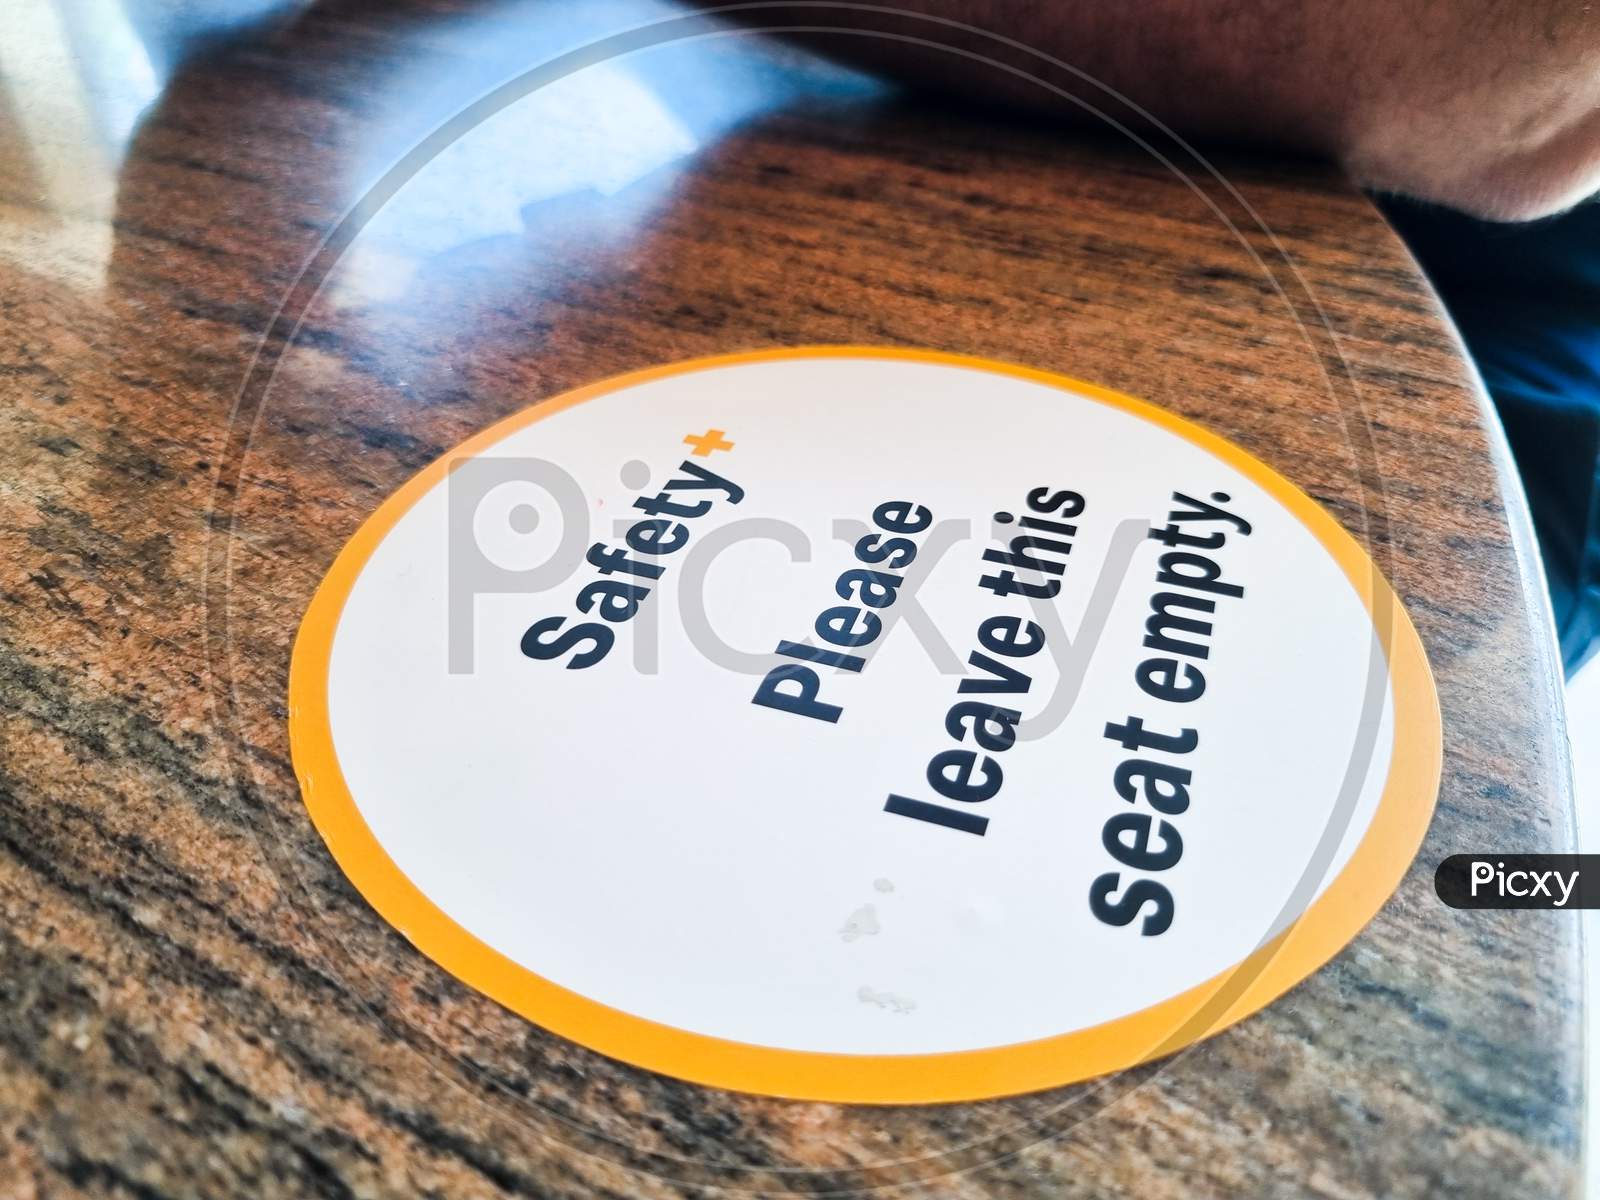 Sticker On Table Showing Mandatory Safety And Hygeine Regulations During The Pandemic On Social Distancing And Leaving Spaces And Seats Empty